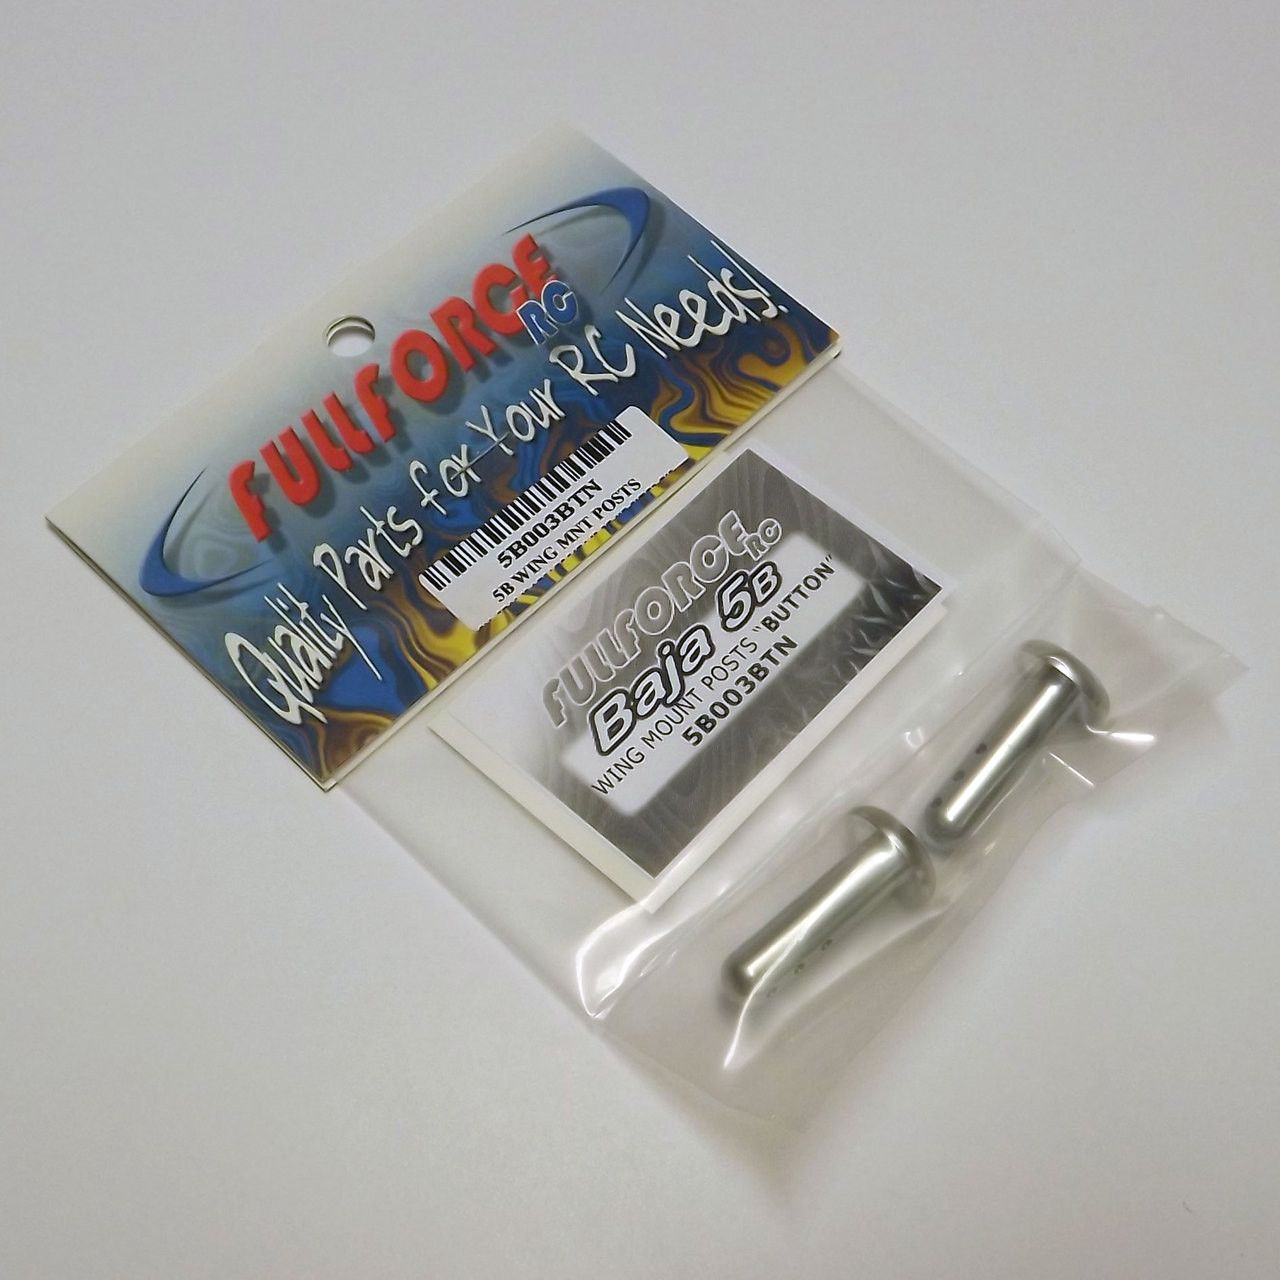 HPI Baja 5B button style wing pins ready to ship!